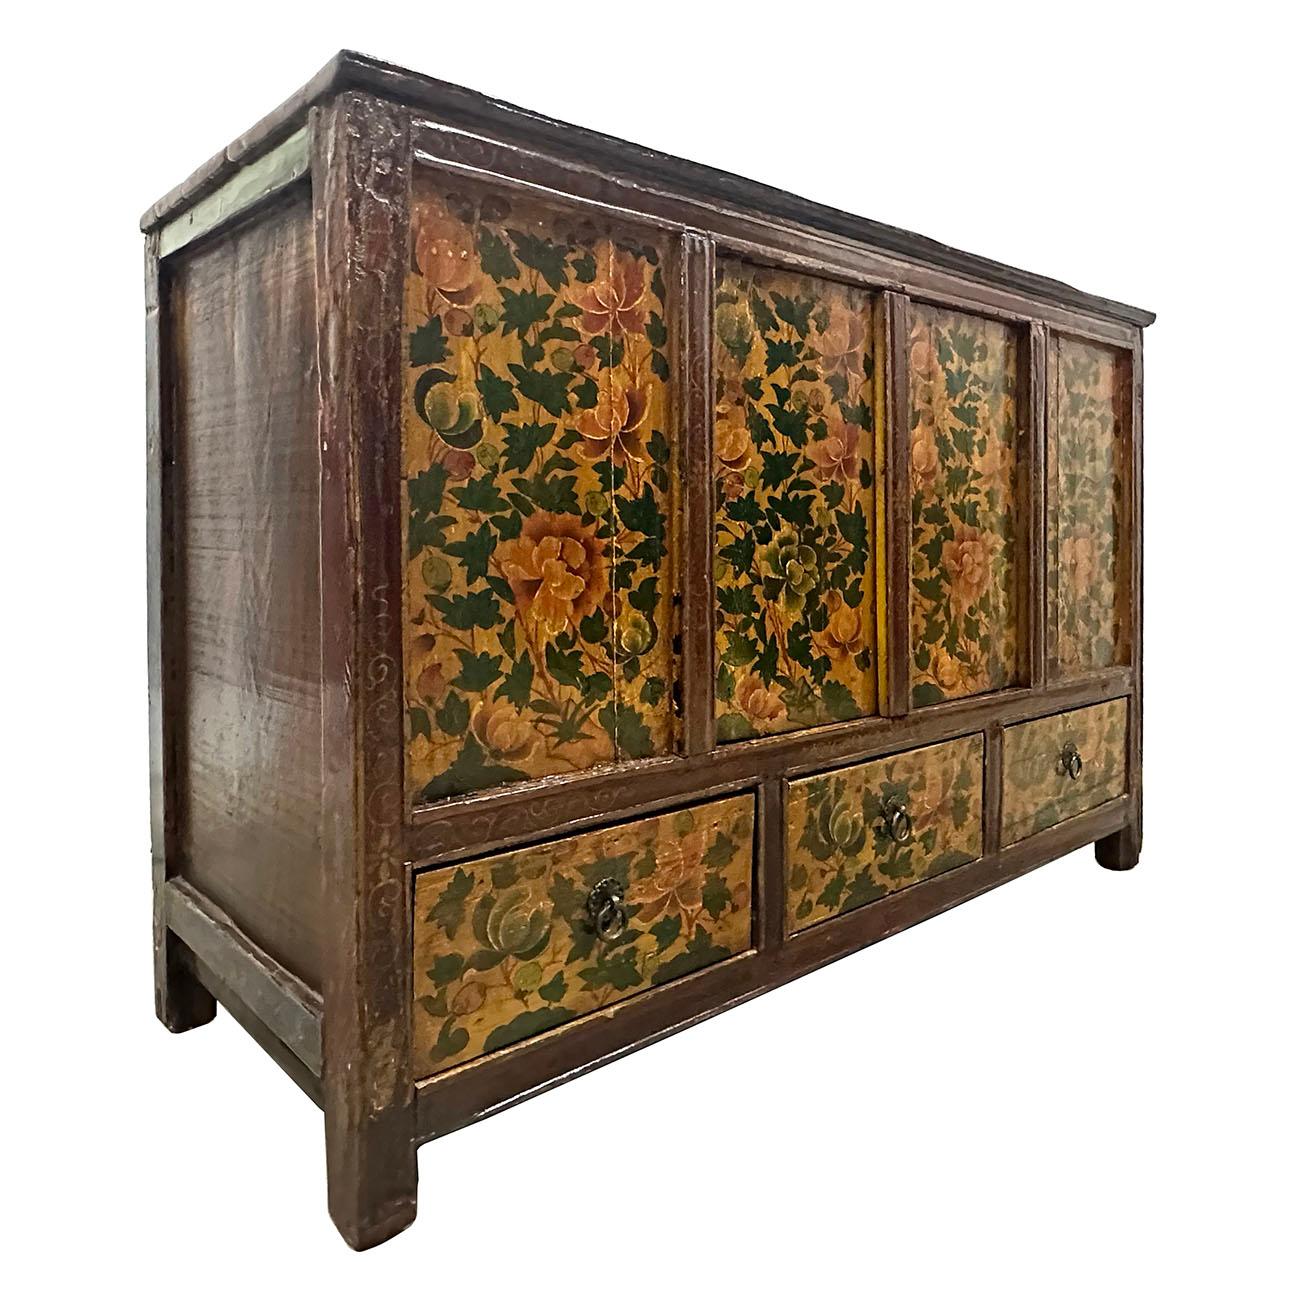 This Antique Tibetan Painted Cabinet is 100% hand made and hand painted using mineral painting which last the paint a much longer time. You can see some of the finish has already lost. This Cabinet has a double removable doors compartment on the